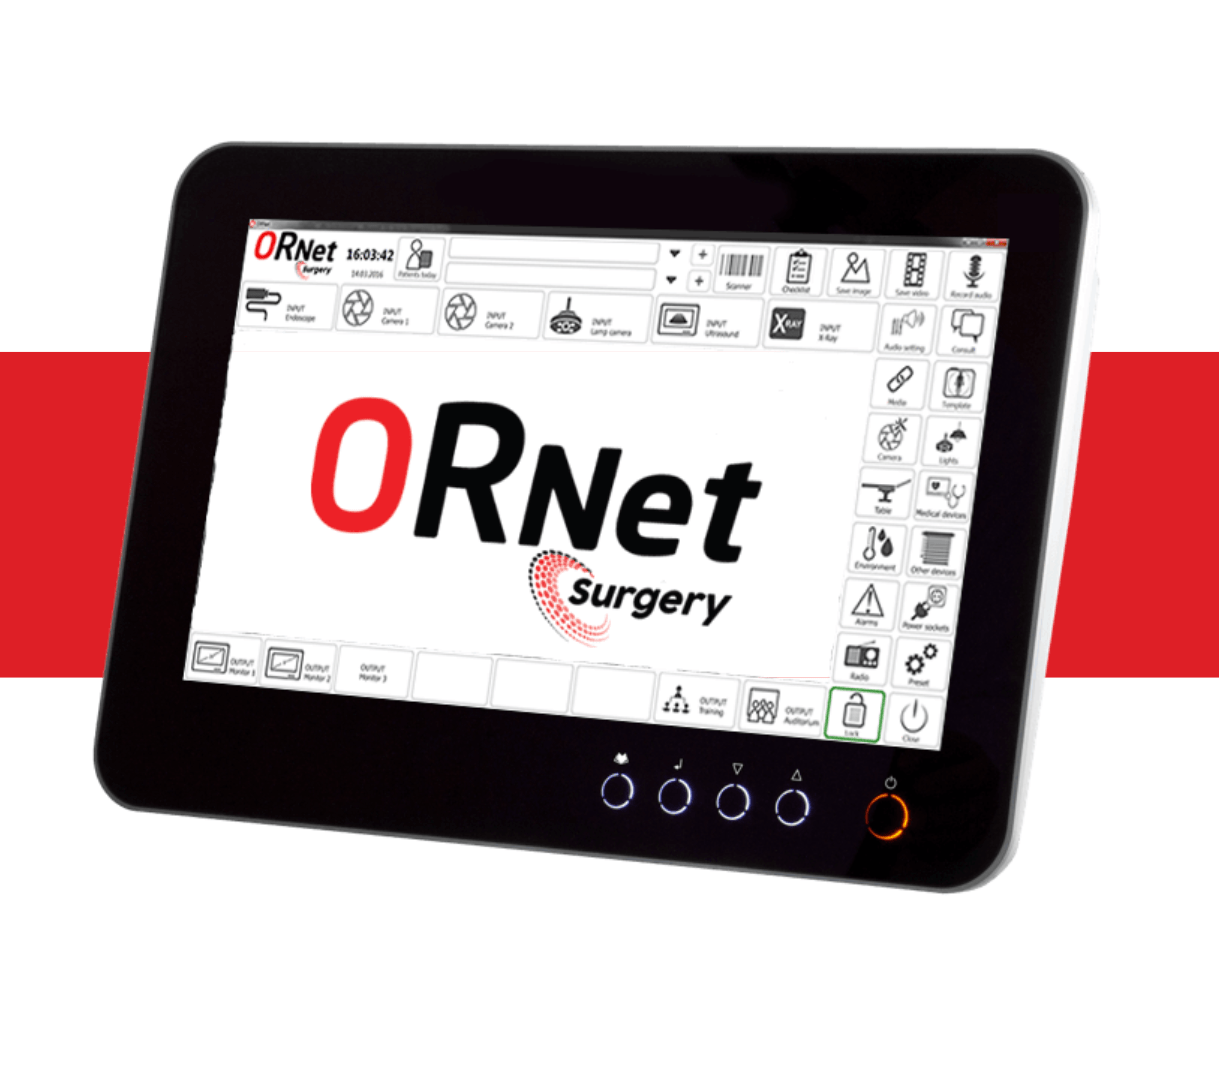 ORNet surgery - An operating room integration and management system